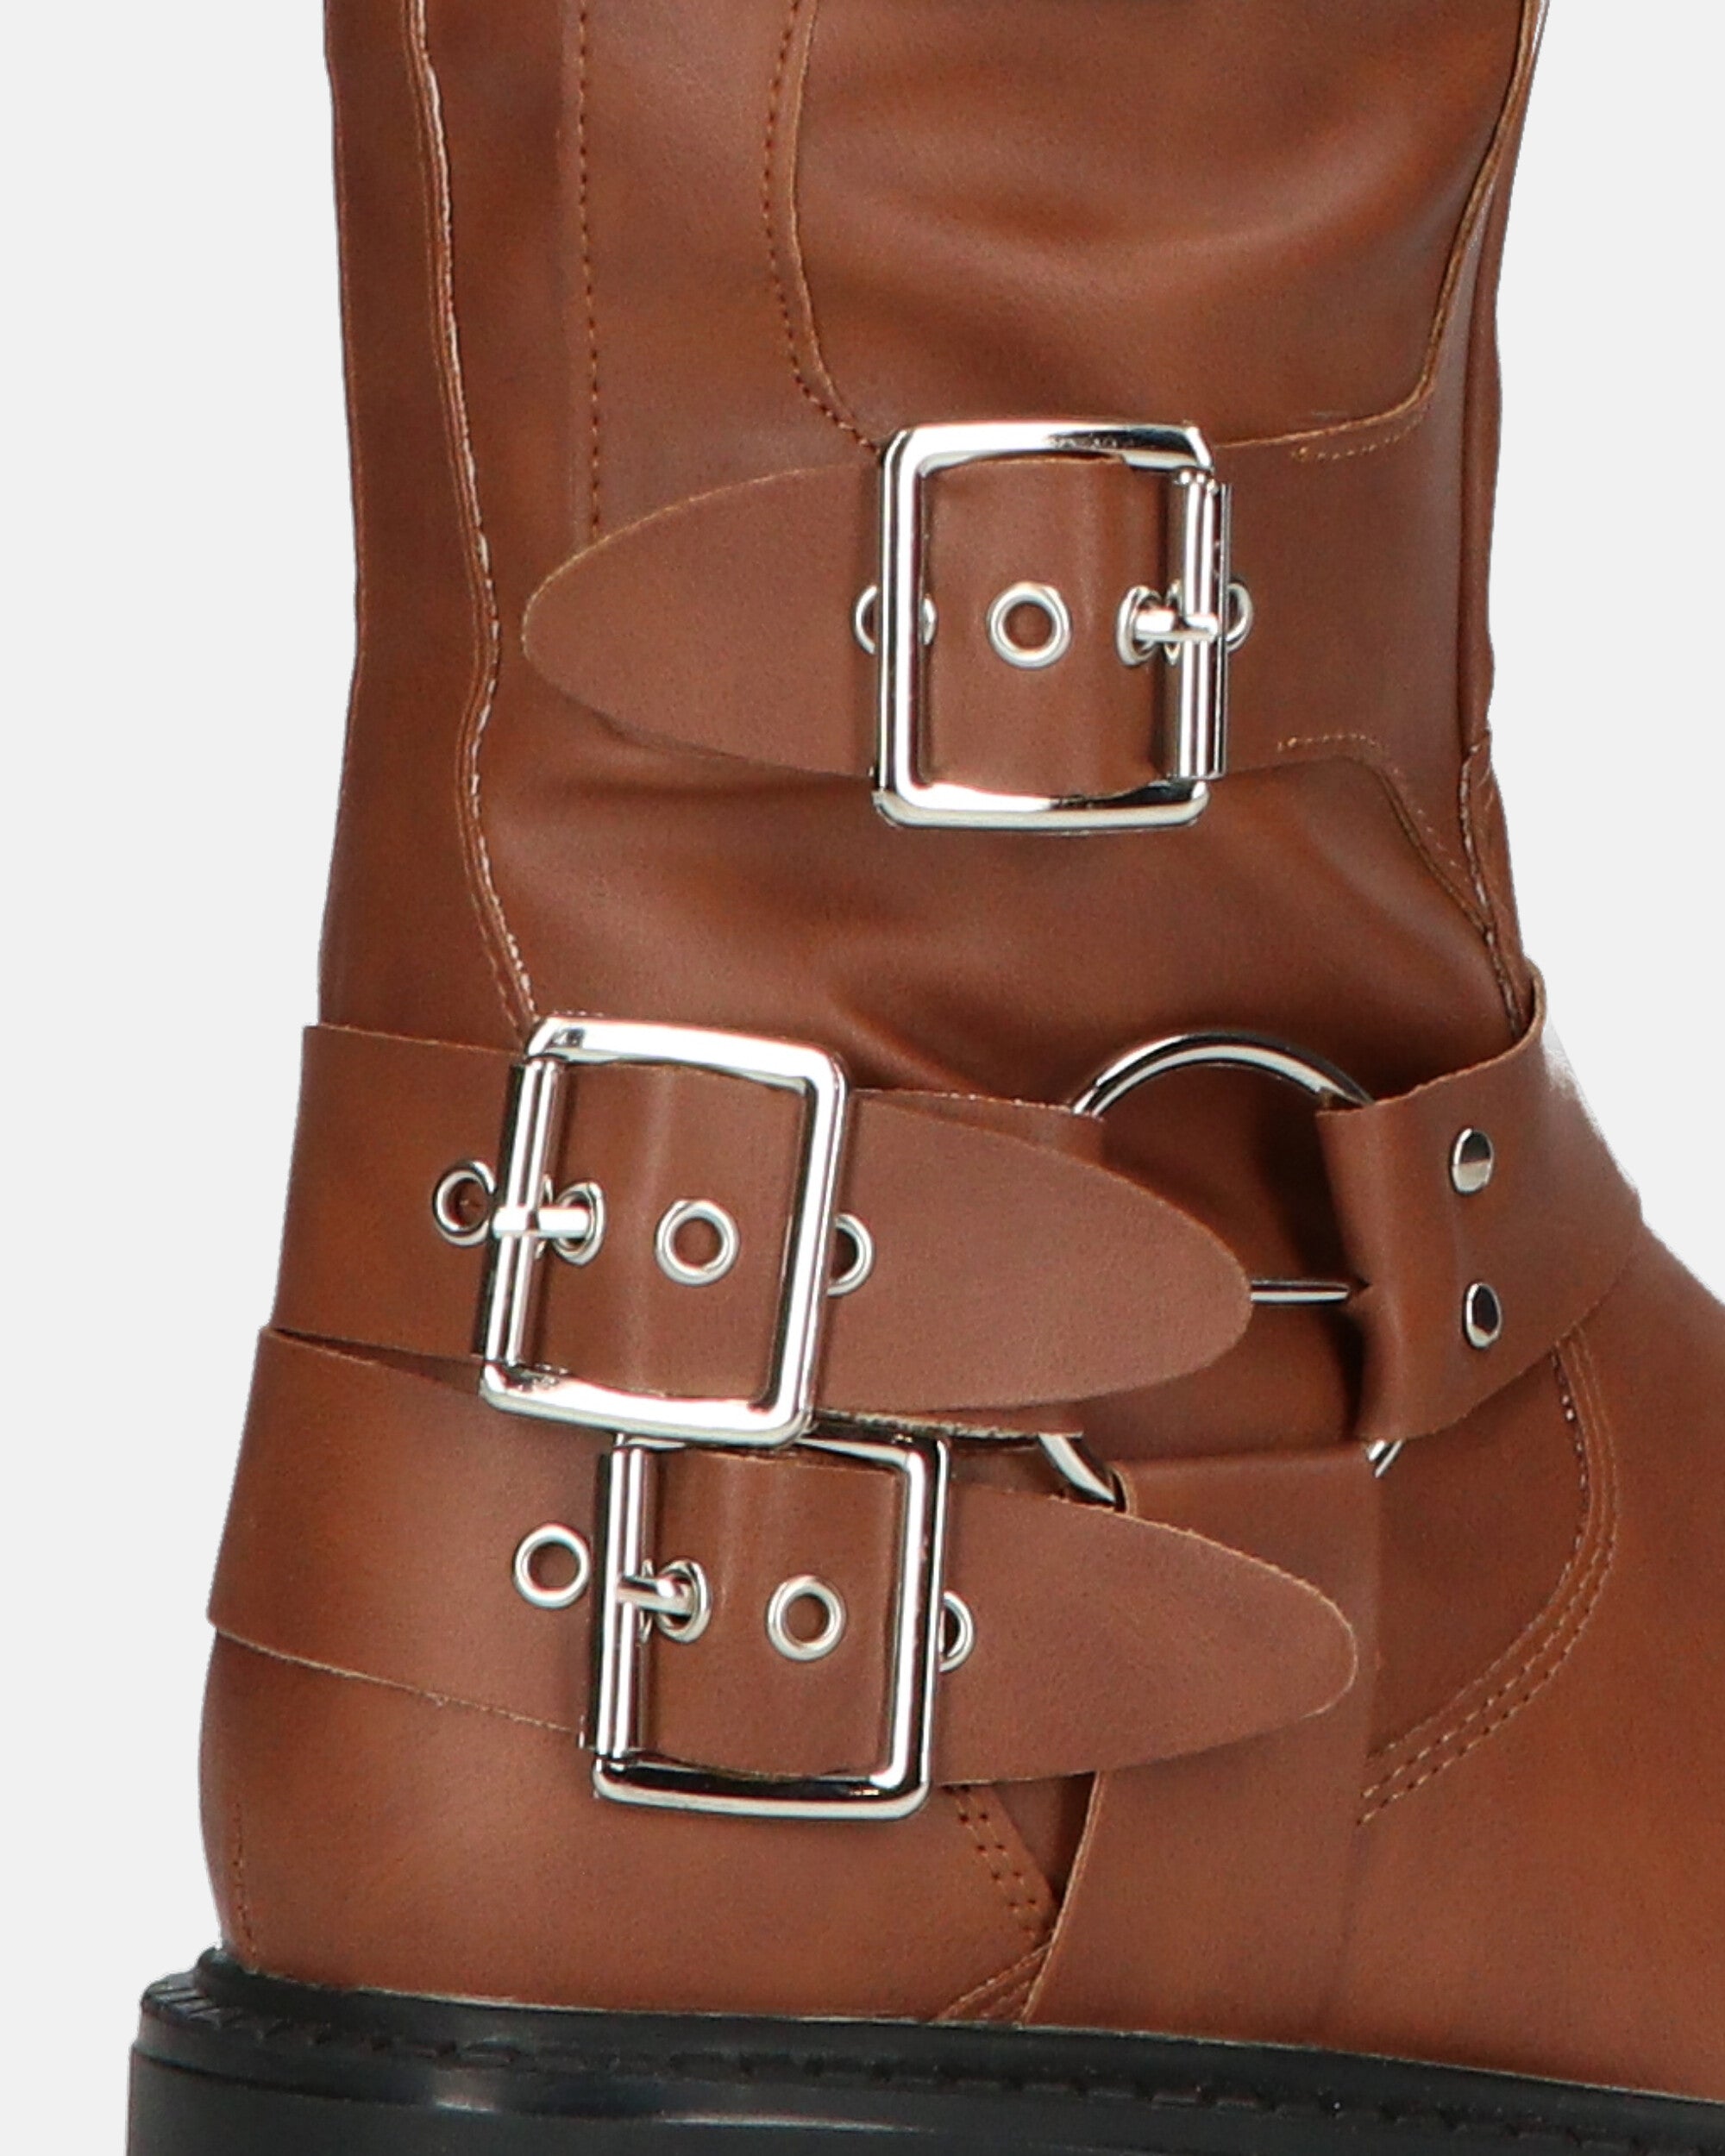 NYX - brown high amphibious boots with straps